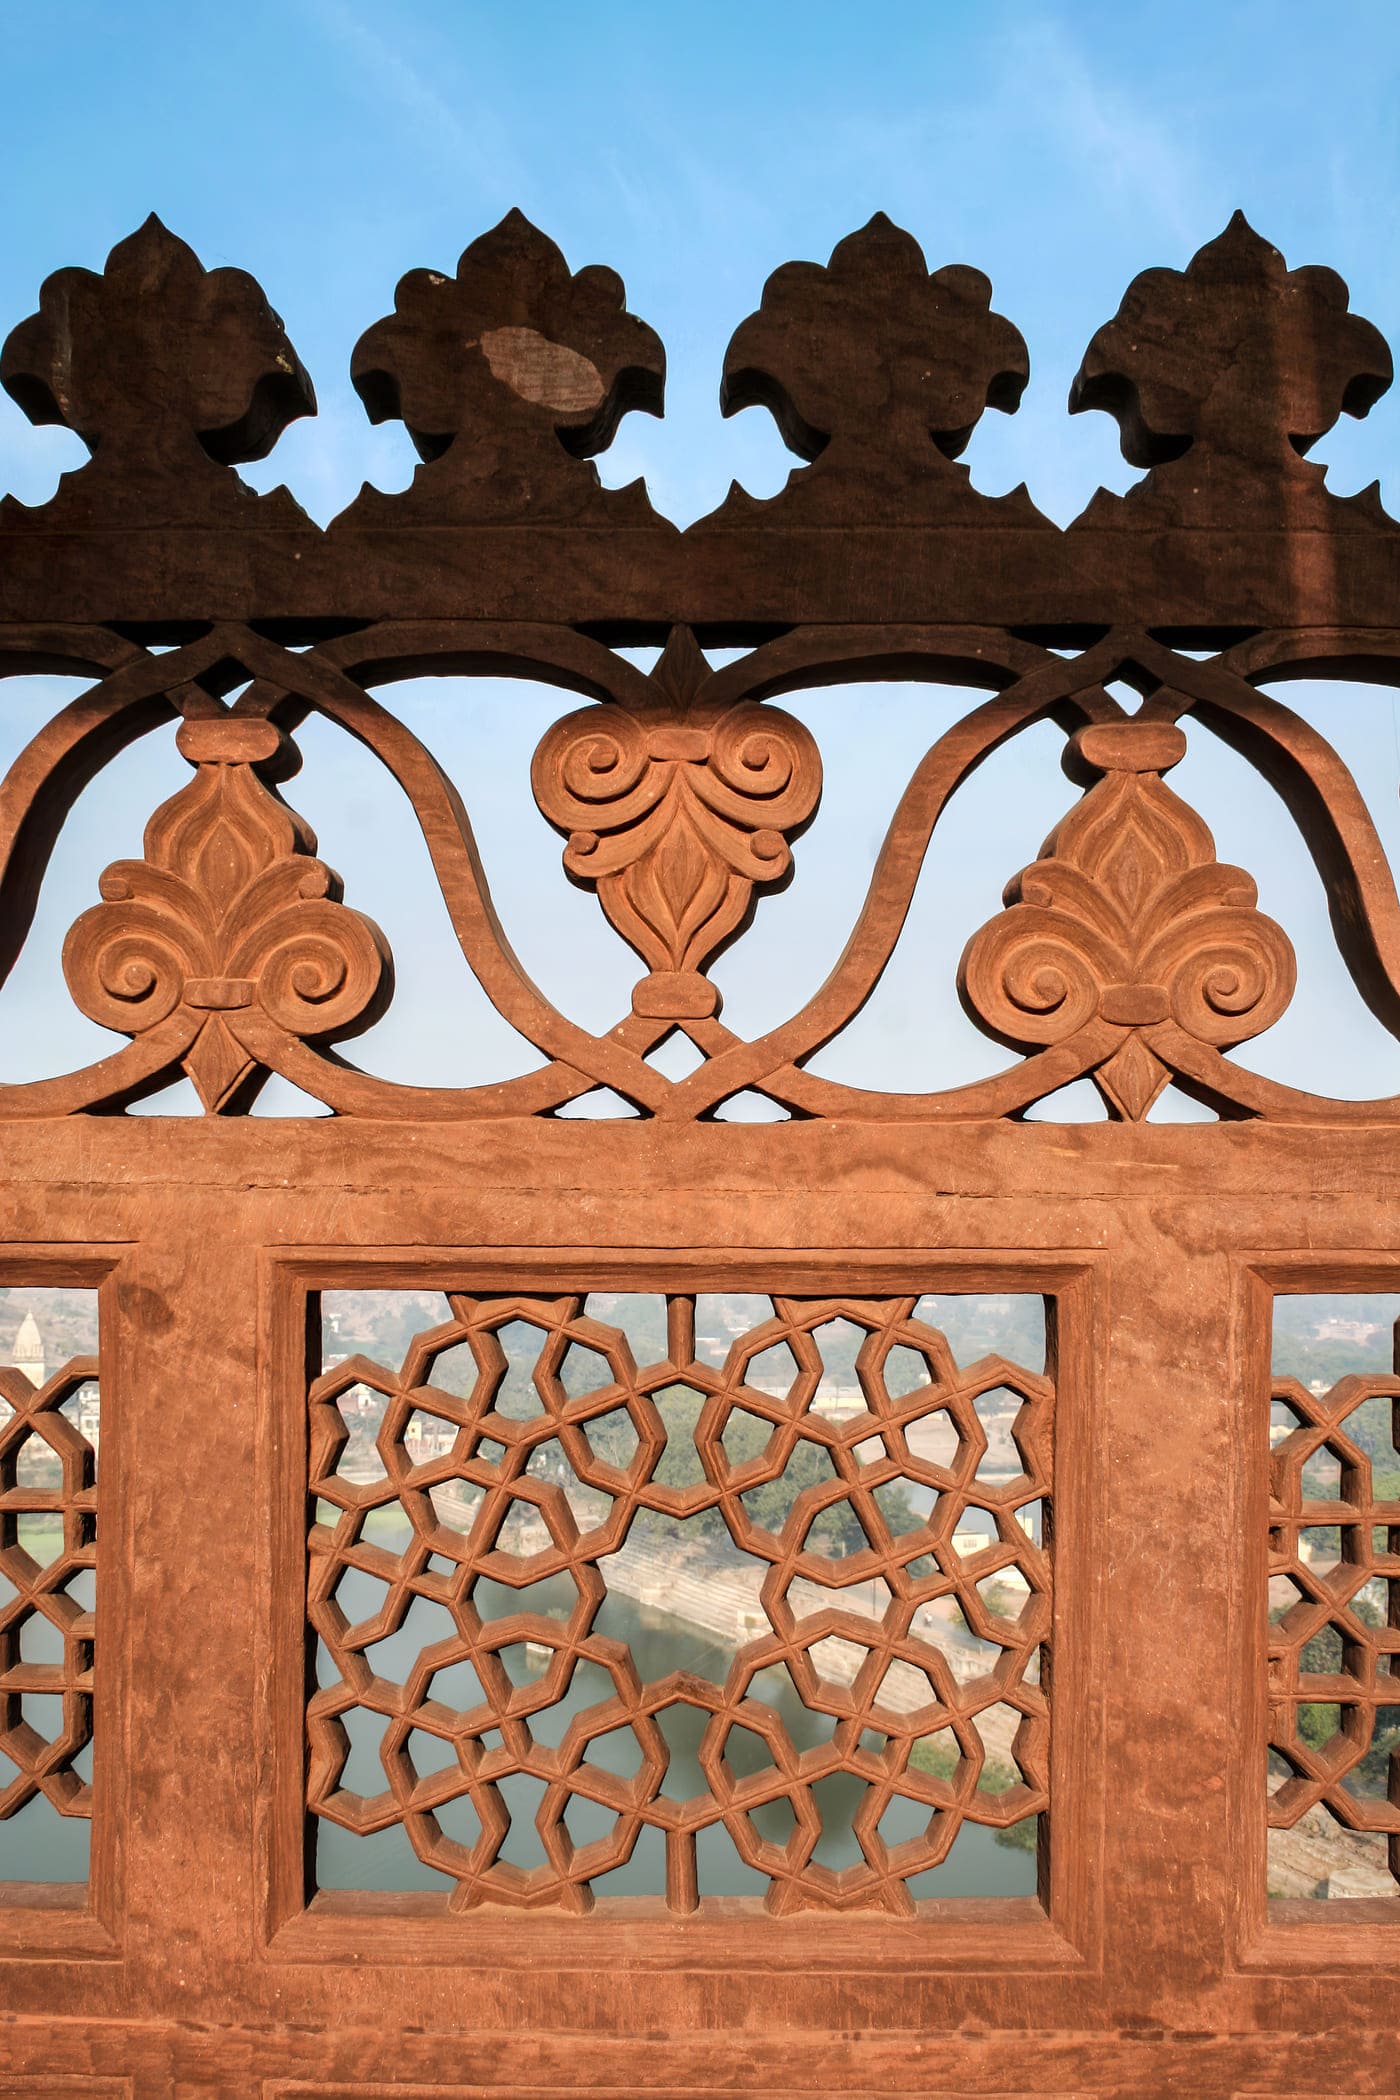 The railing of an open balcony passageway at the Datia Palace shows the skilled craftsmanship of the artisan who carved careful patterns onto single pieces of stone that then became the railing, Madhya Pradesh 